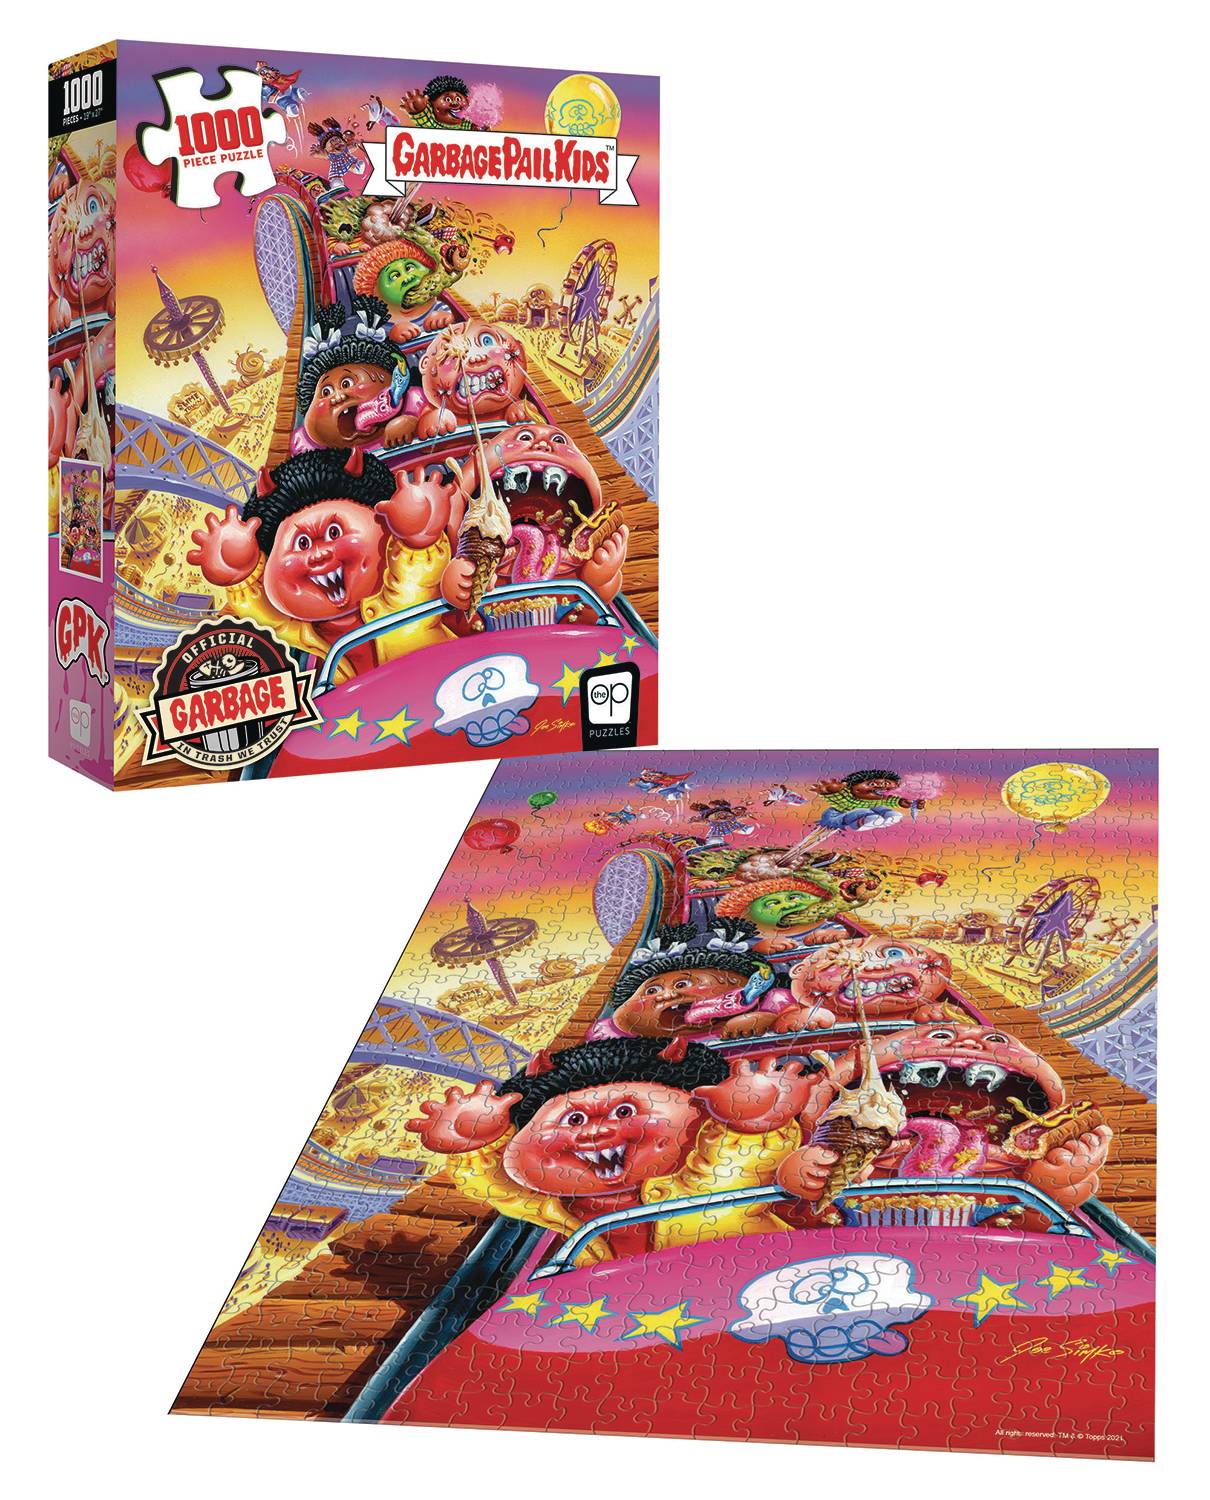 GARBAGE PAIL KIDS THRILLS & CHILLS 1000 PC PUZZLE - Linebreakers